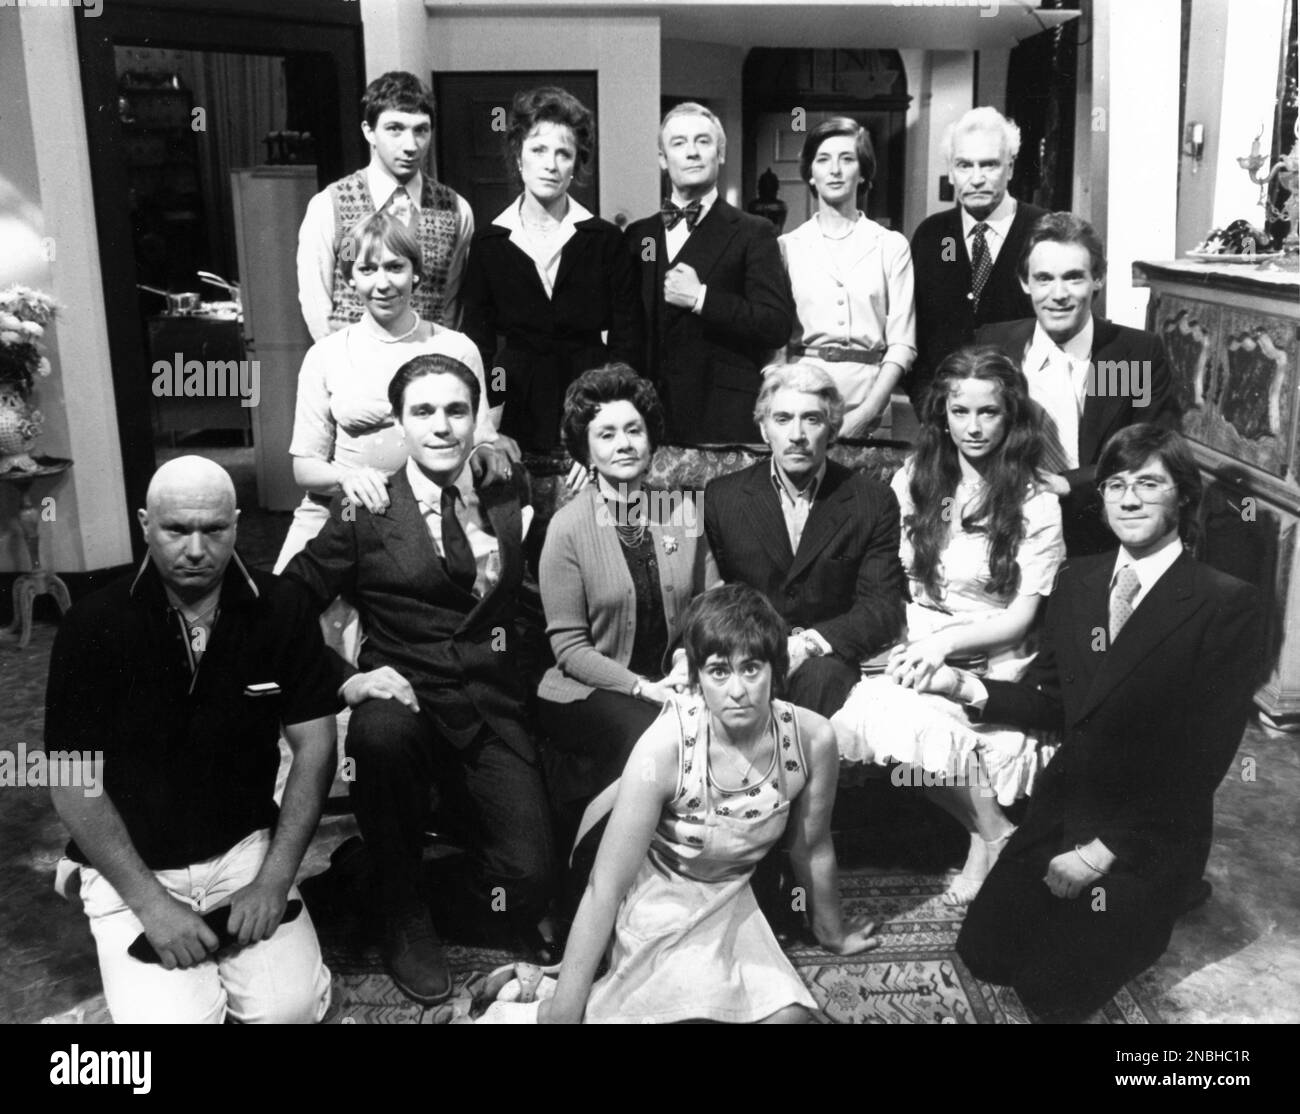 LAURENCE OLIVIER (top right) with from top left JUDY PARFITT EDWARD WOODWARD CAROLINE BLAKISTON GABRIELLE LLOYD CLIVE FRANCIS MICHAEL ELPHICK NICHOLAS CLAY JOAN PLOWRIGHT FRANK FINLAY CELIA GREGORY JOHN DUTTINE and (front centre) MAGGIE WELLS in SATURDAY SUNDAY MONDAY 1978 director ALAN BRIDGES play Eduardo De Filippo adaptation Keith Waterhouse and Willis Hall costume design Frances Tempest from the British TV series LAURENCE OLIVIER PRESENTS producer Laurence Olivier Granada Television Stock Photo